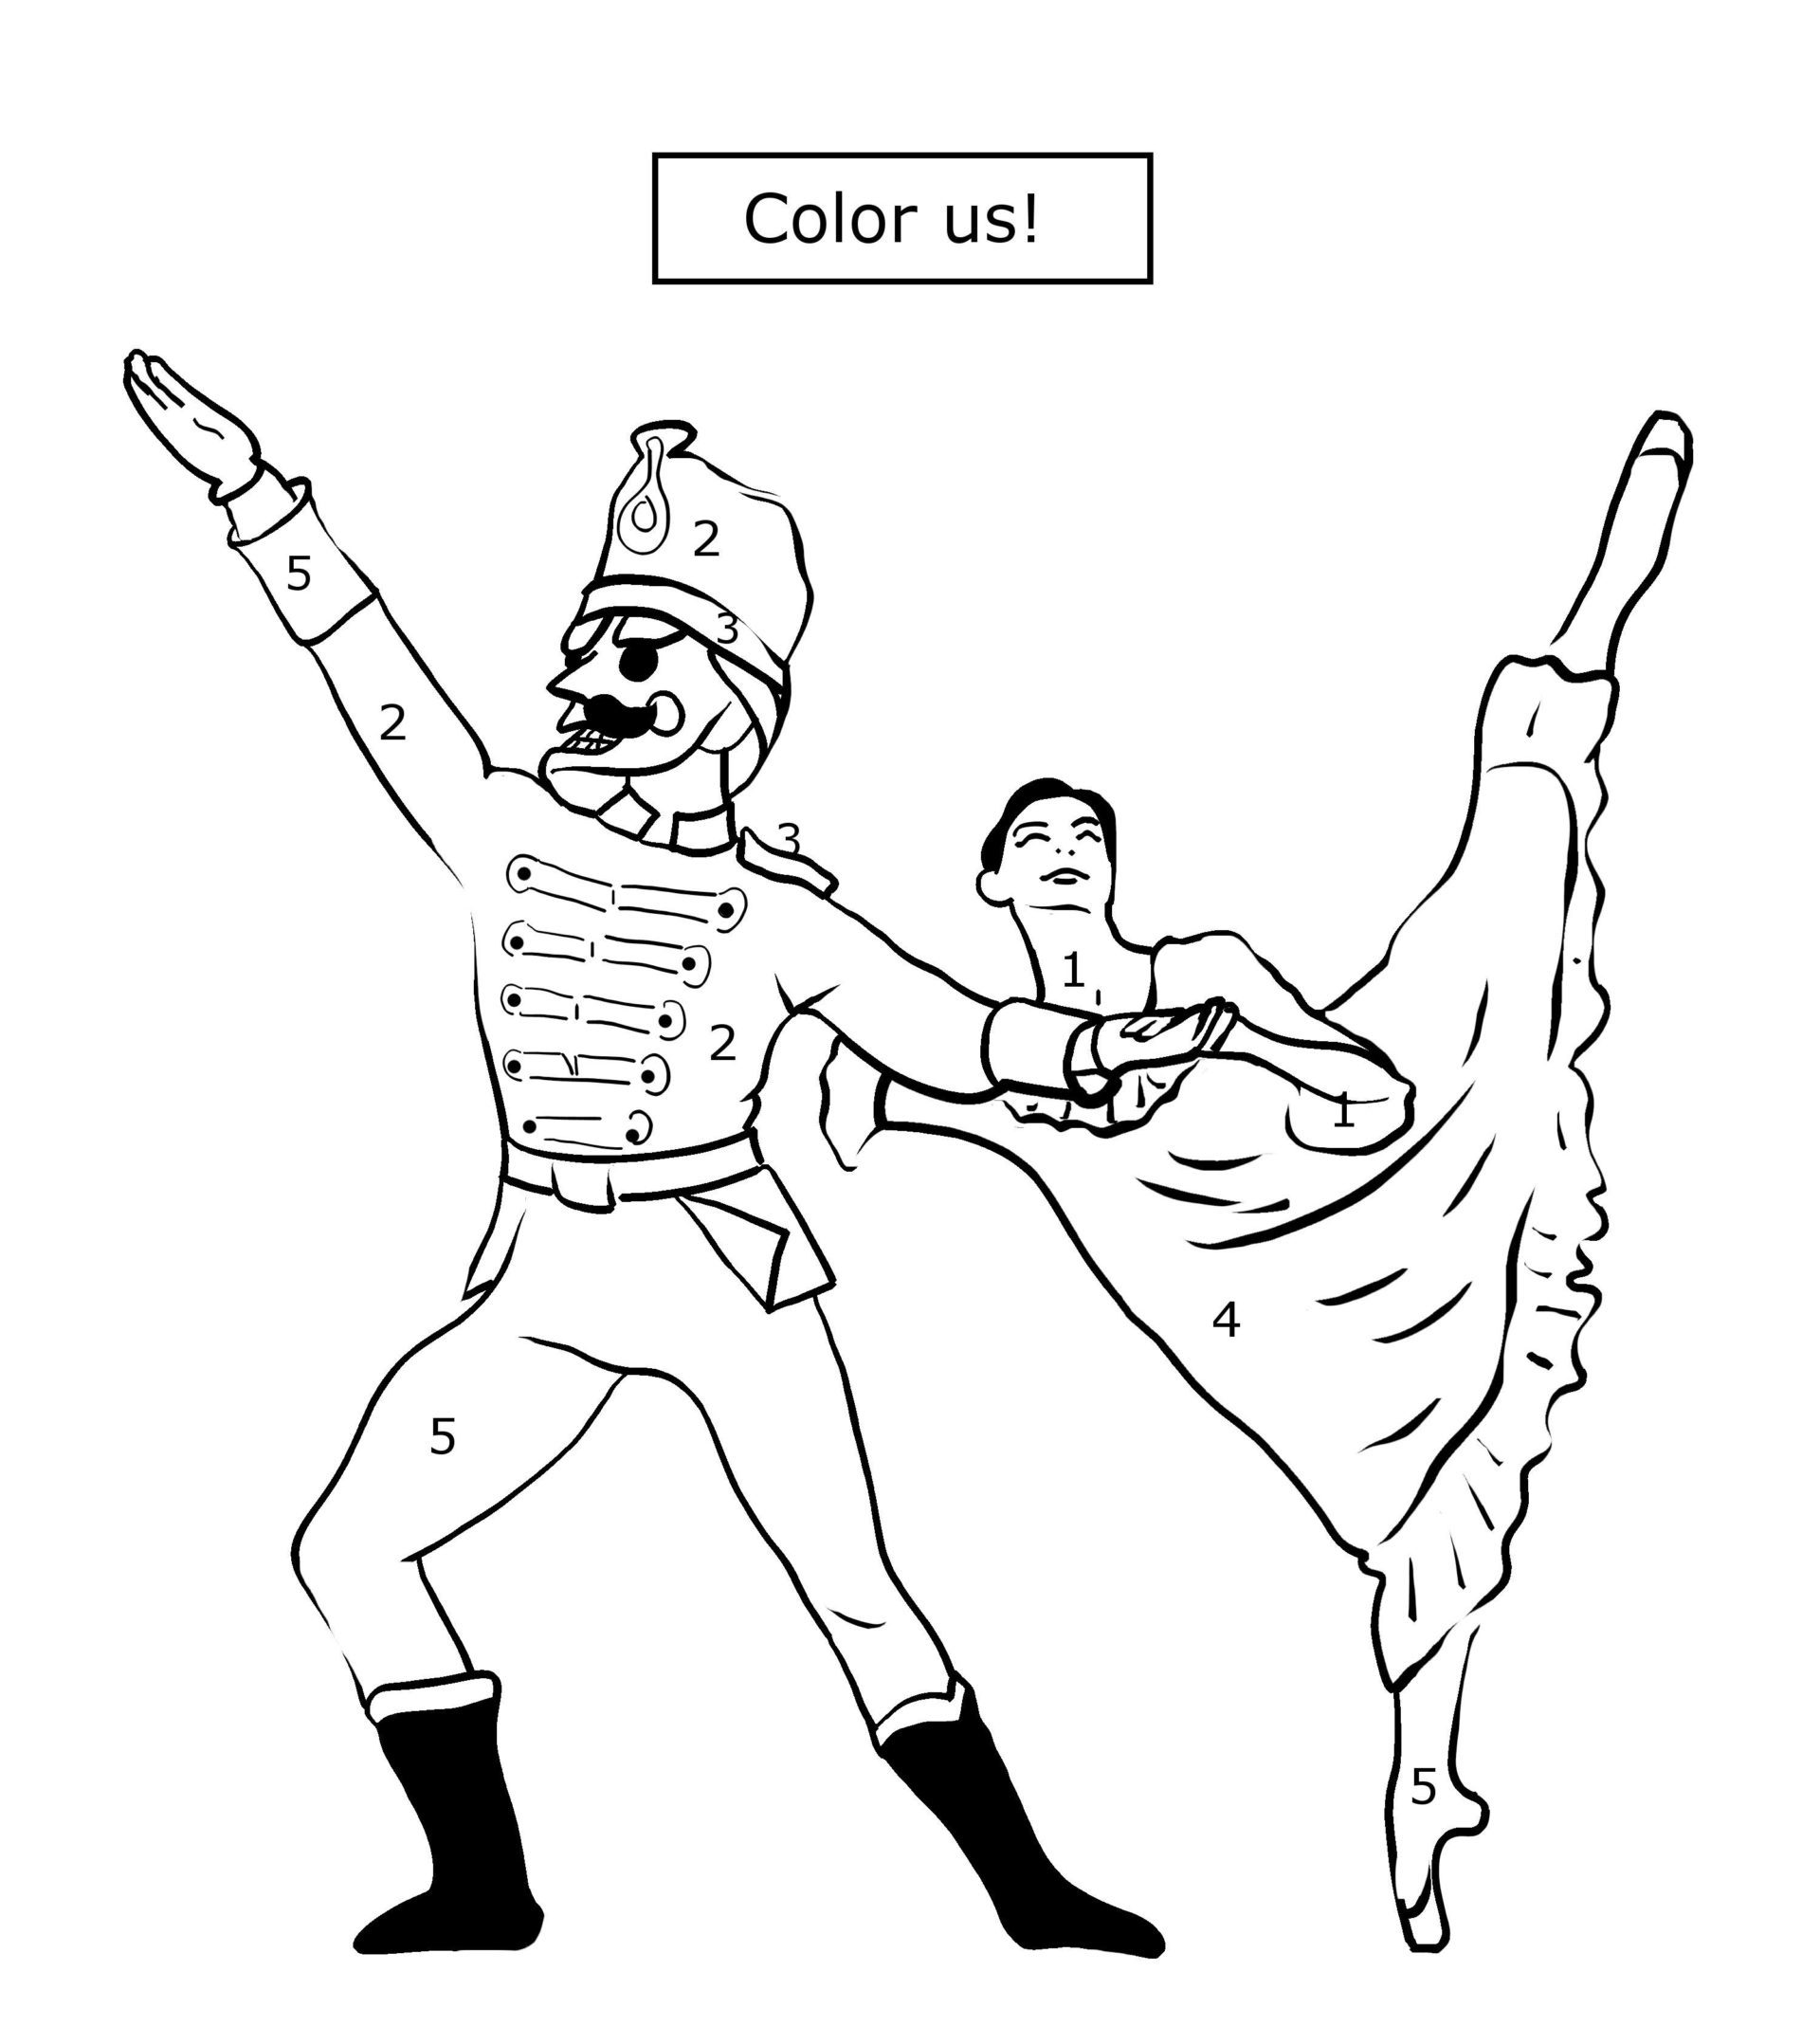 Nutcracker coloring sheets pack of â coloring books for kidz